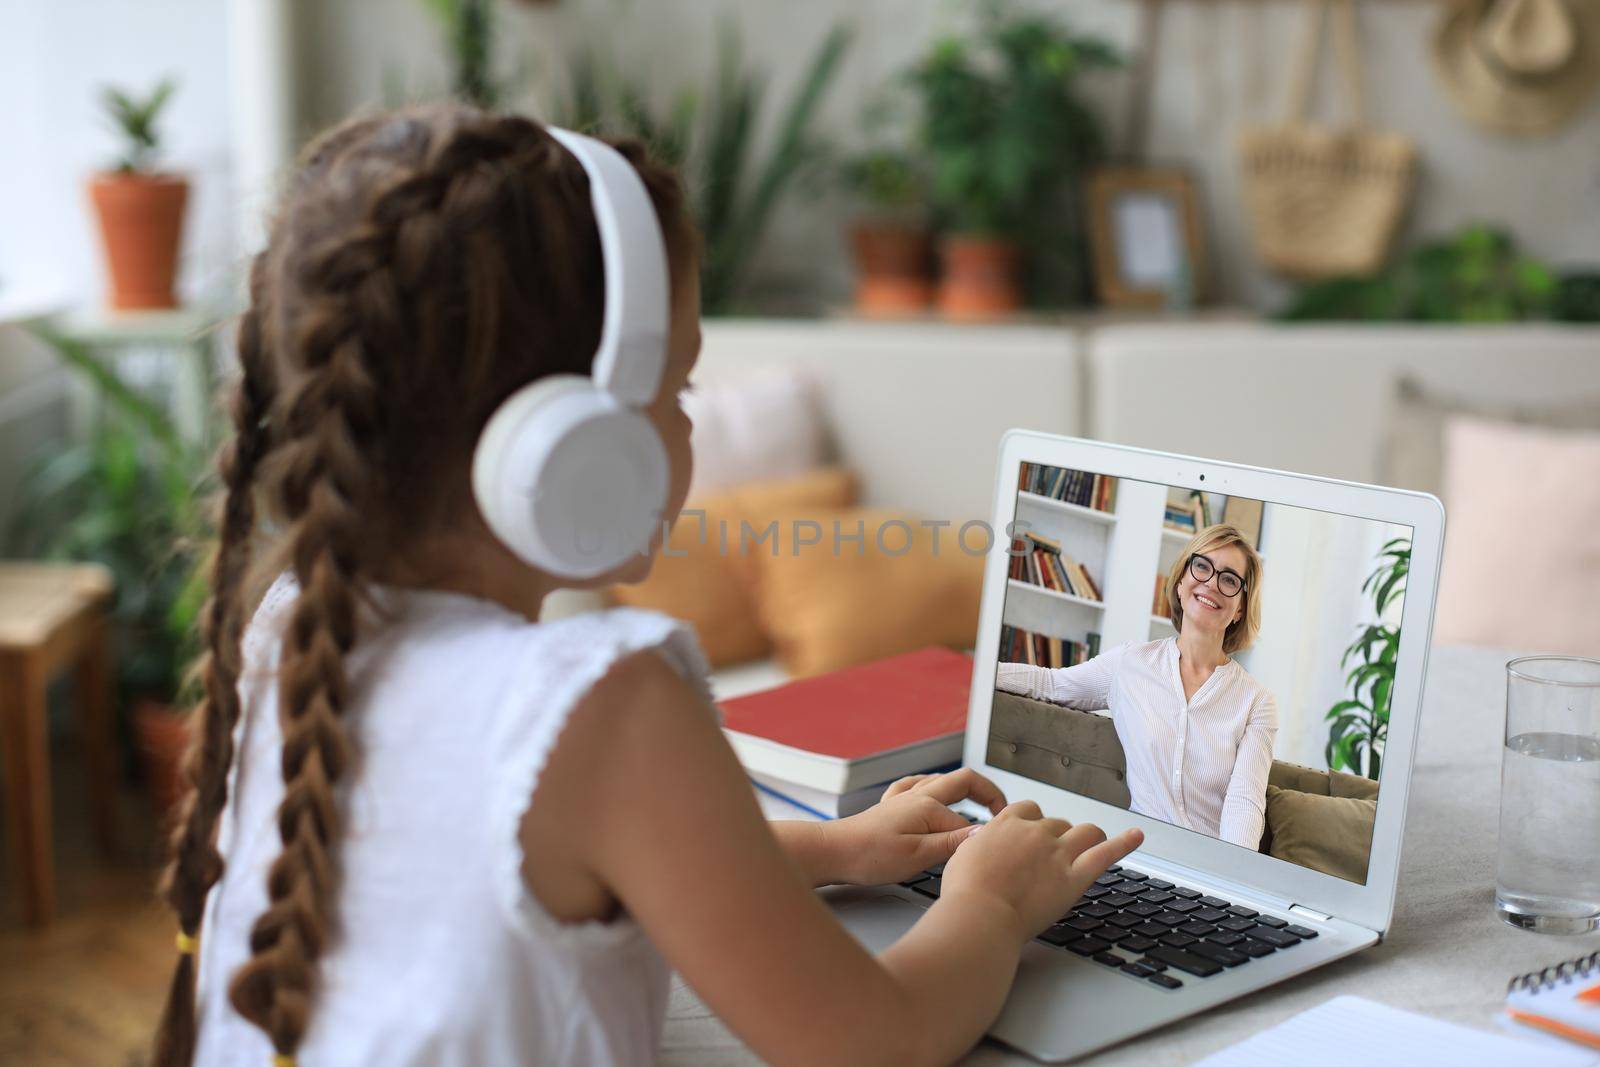 Distance learning. Cheerful little girl girl in headphones using laptop studying through online e-learning system